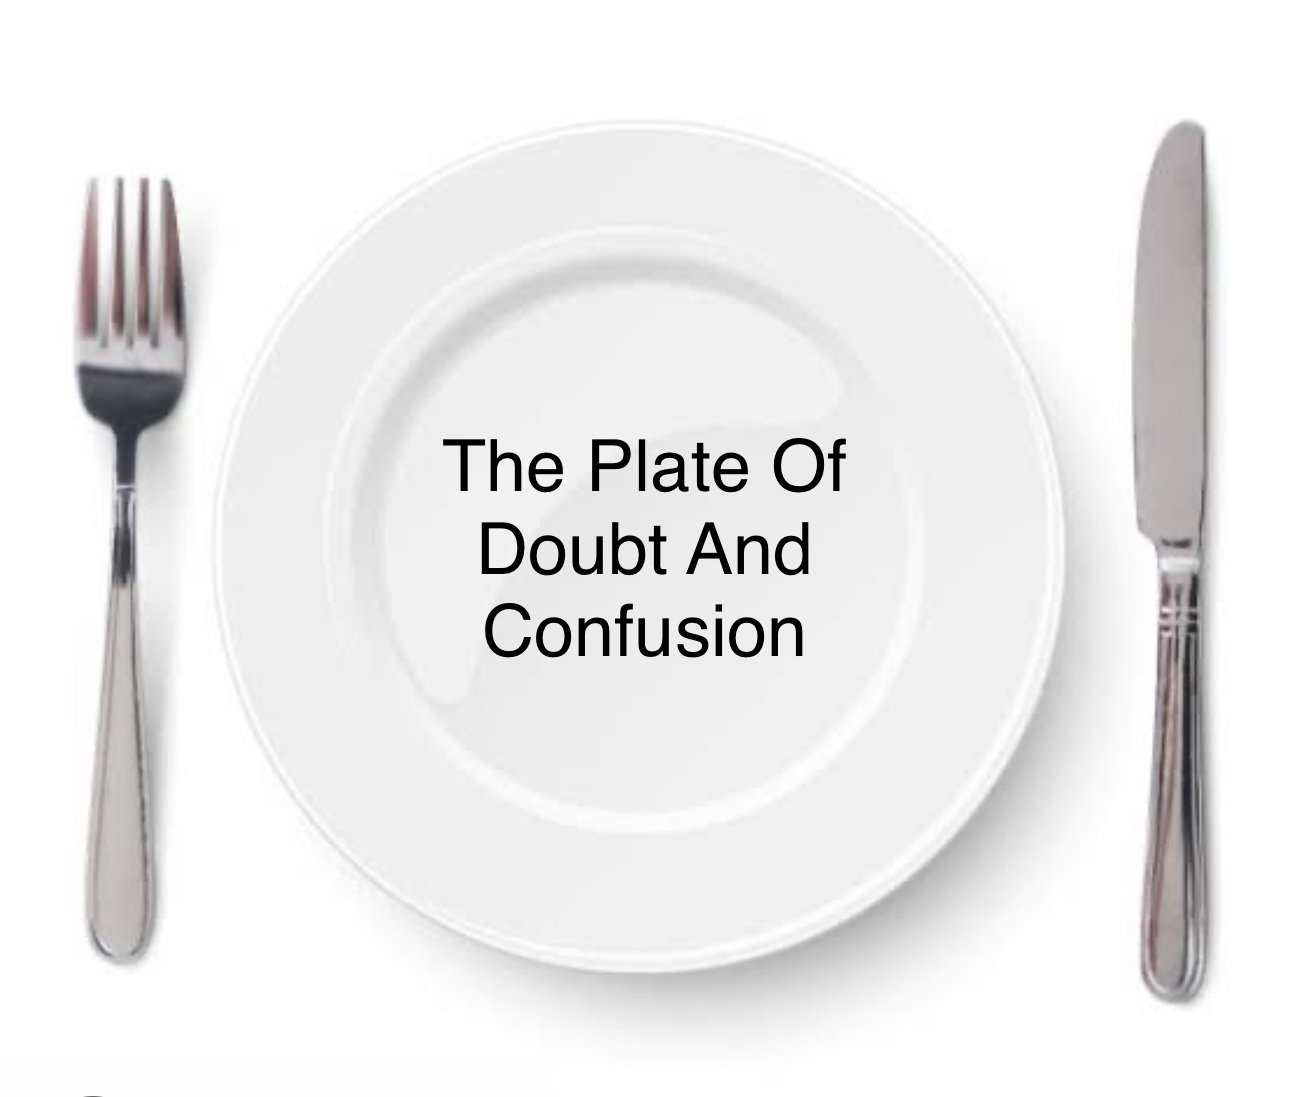 Day 4: The Plate Of Doubt and Confusion